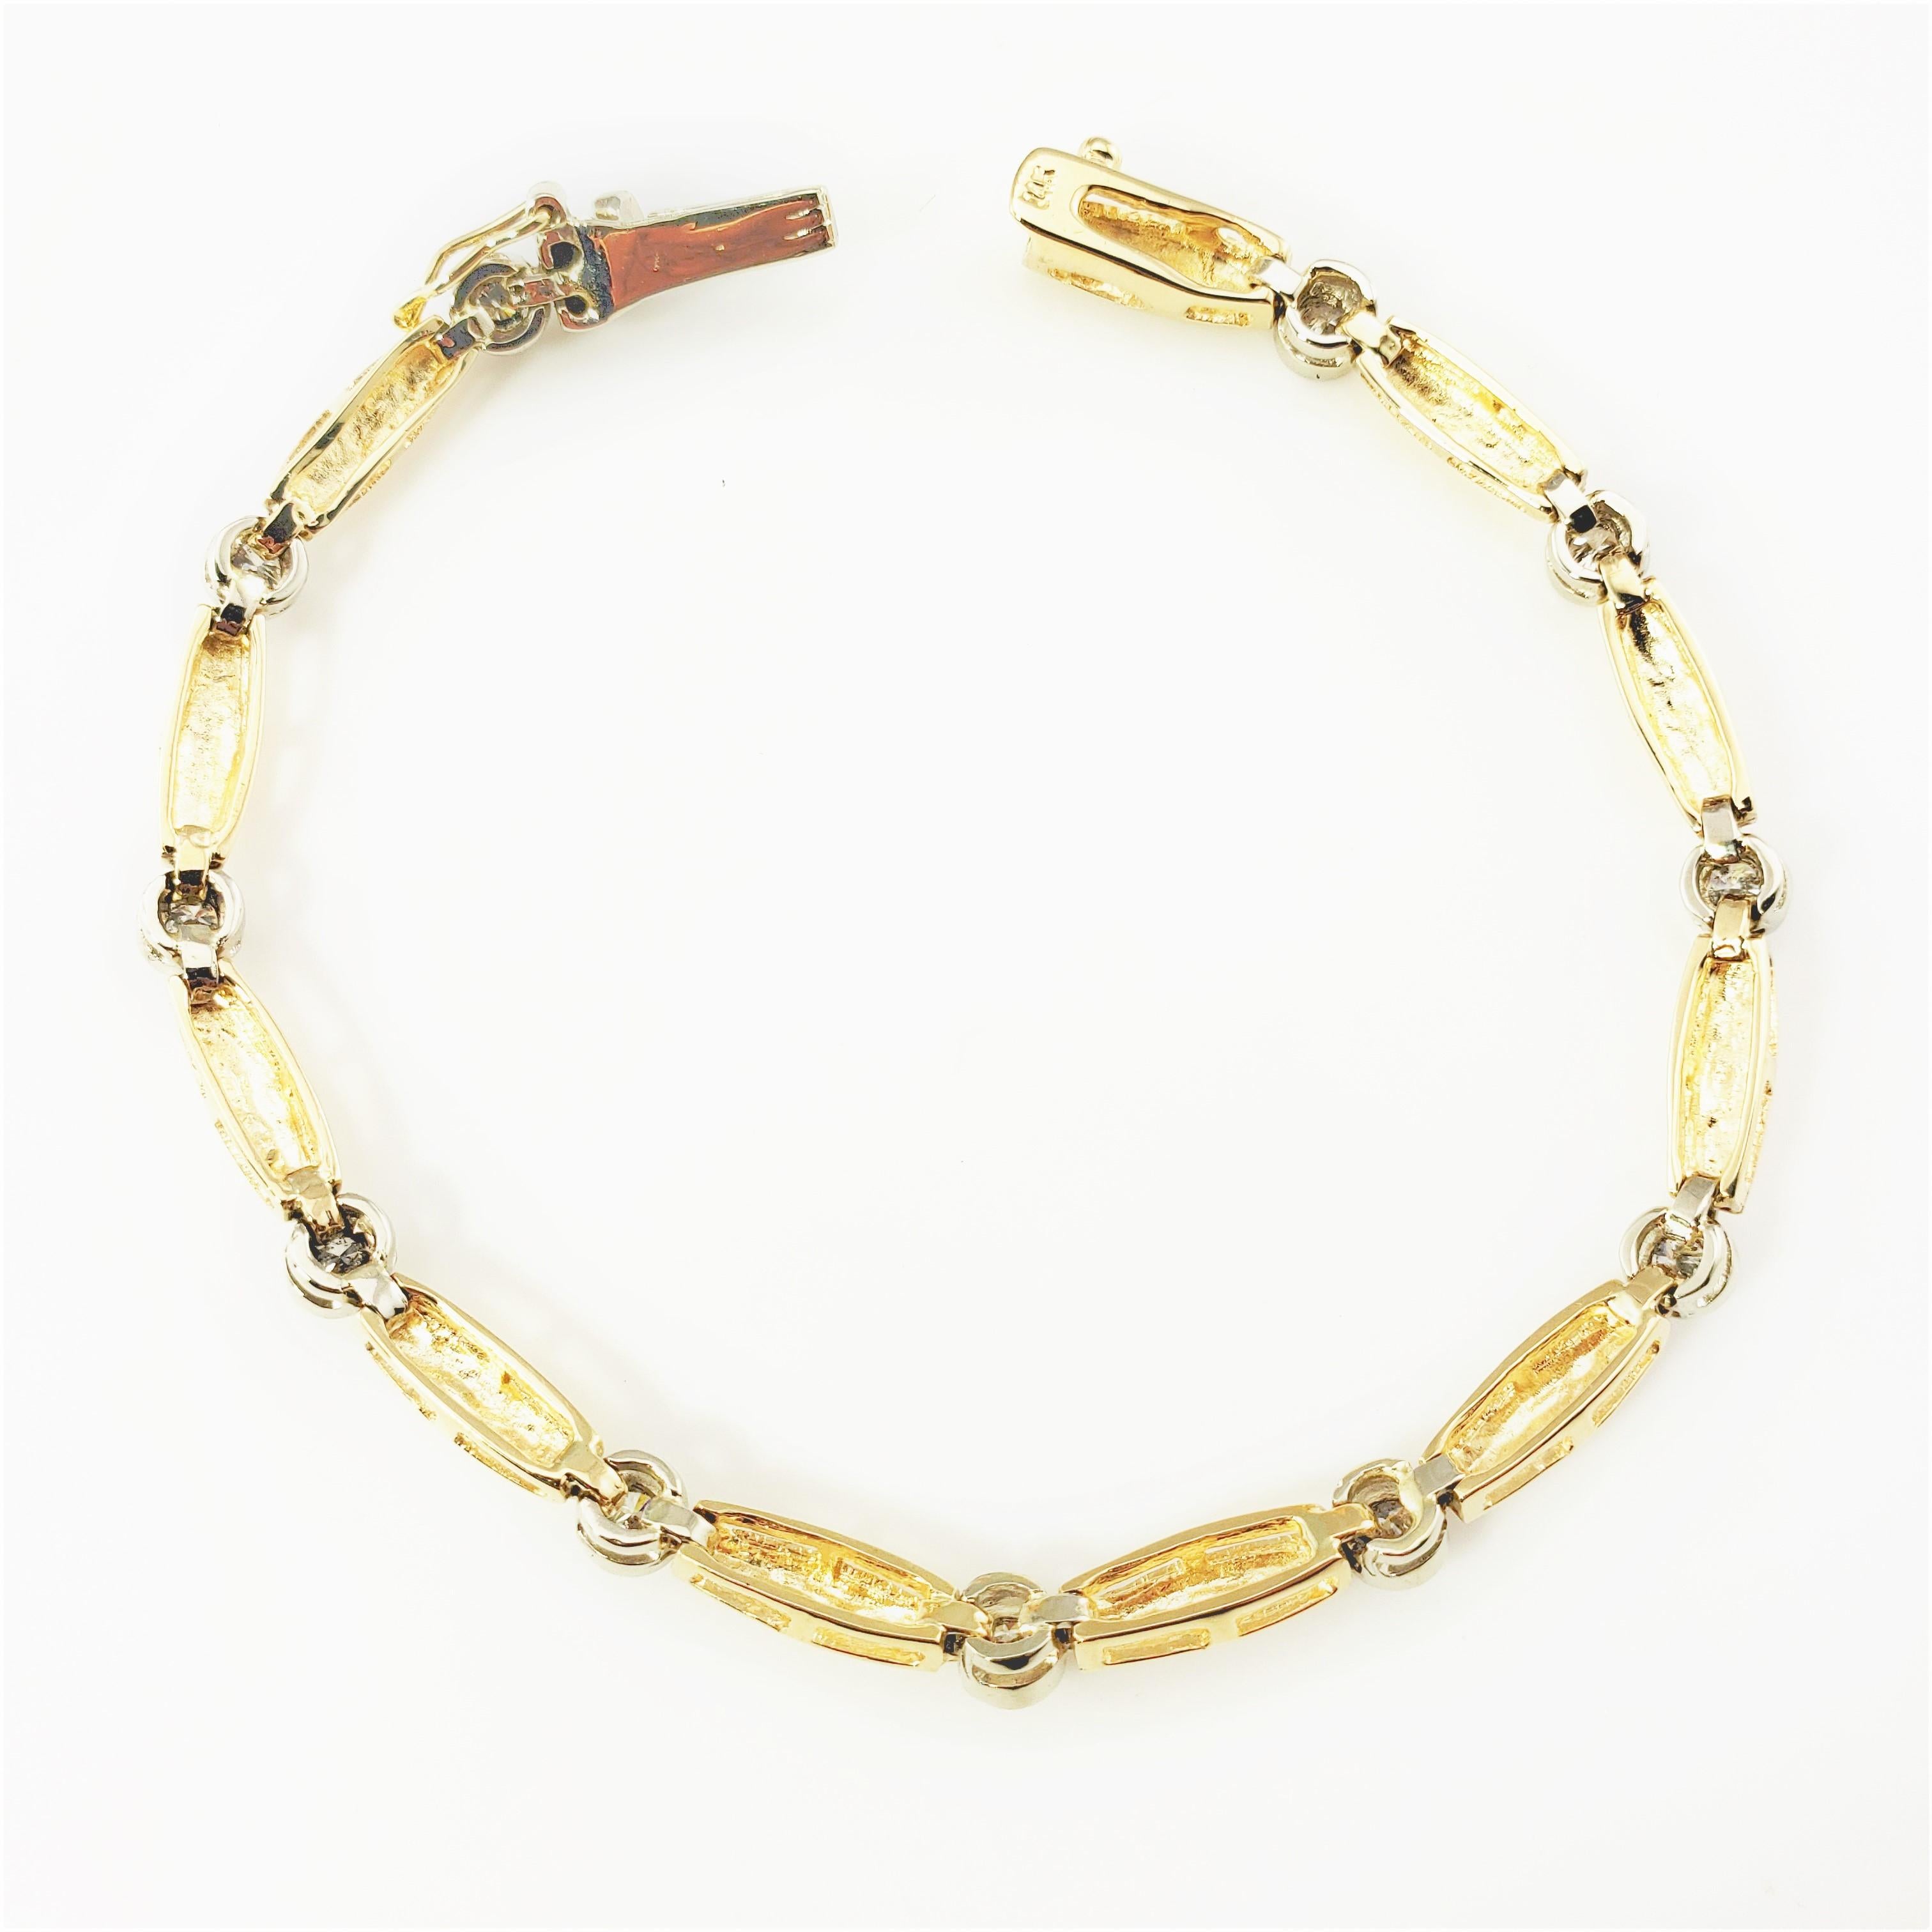 14 Karat Yellow Gold and Diamond Bracelet-

This sparkling bracelet features 11 round brilliant cut diamonds set in beautifully detailed 14K yellow gold.  Width:  4 mm.

Approximate total diamond weight:  1.10 ct.

Diamond color:  J

Diamond